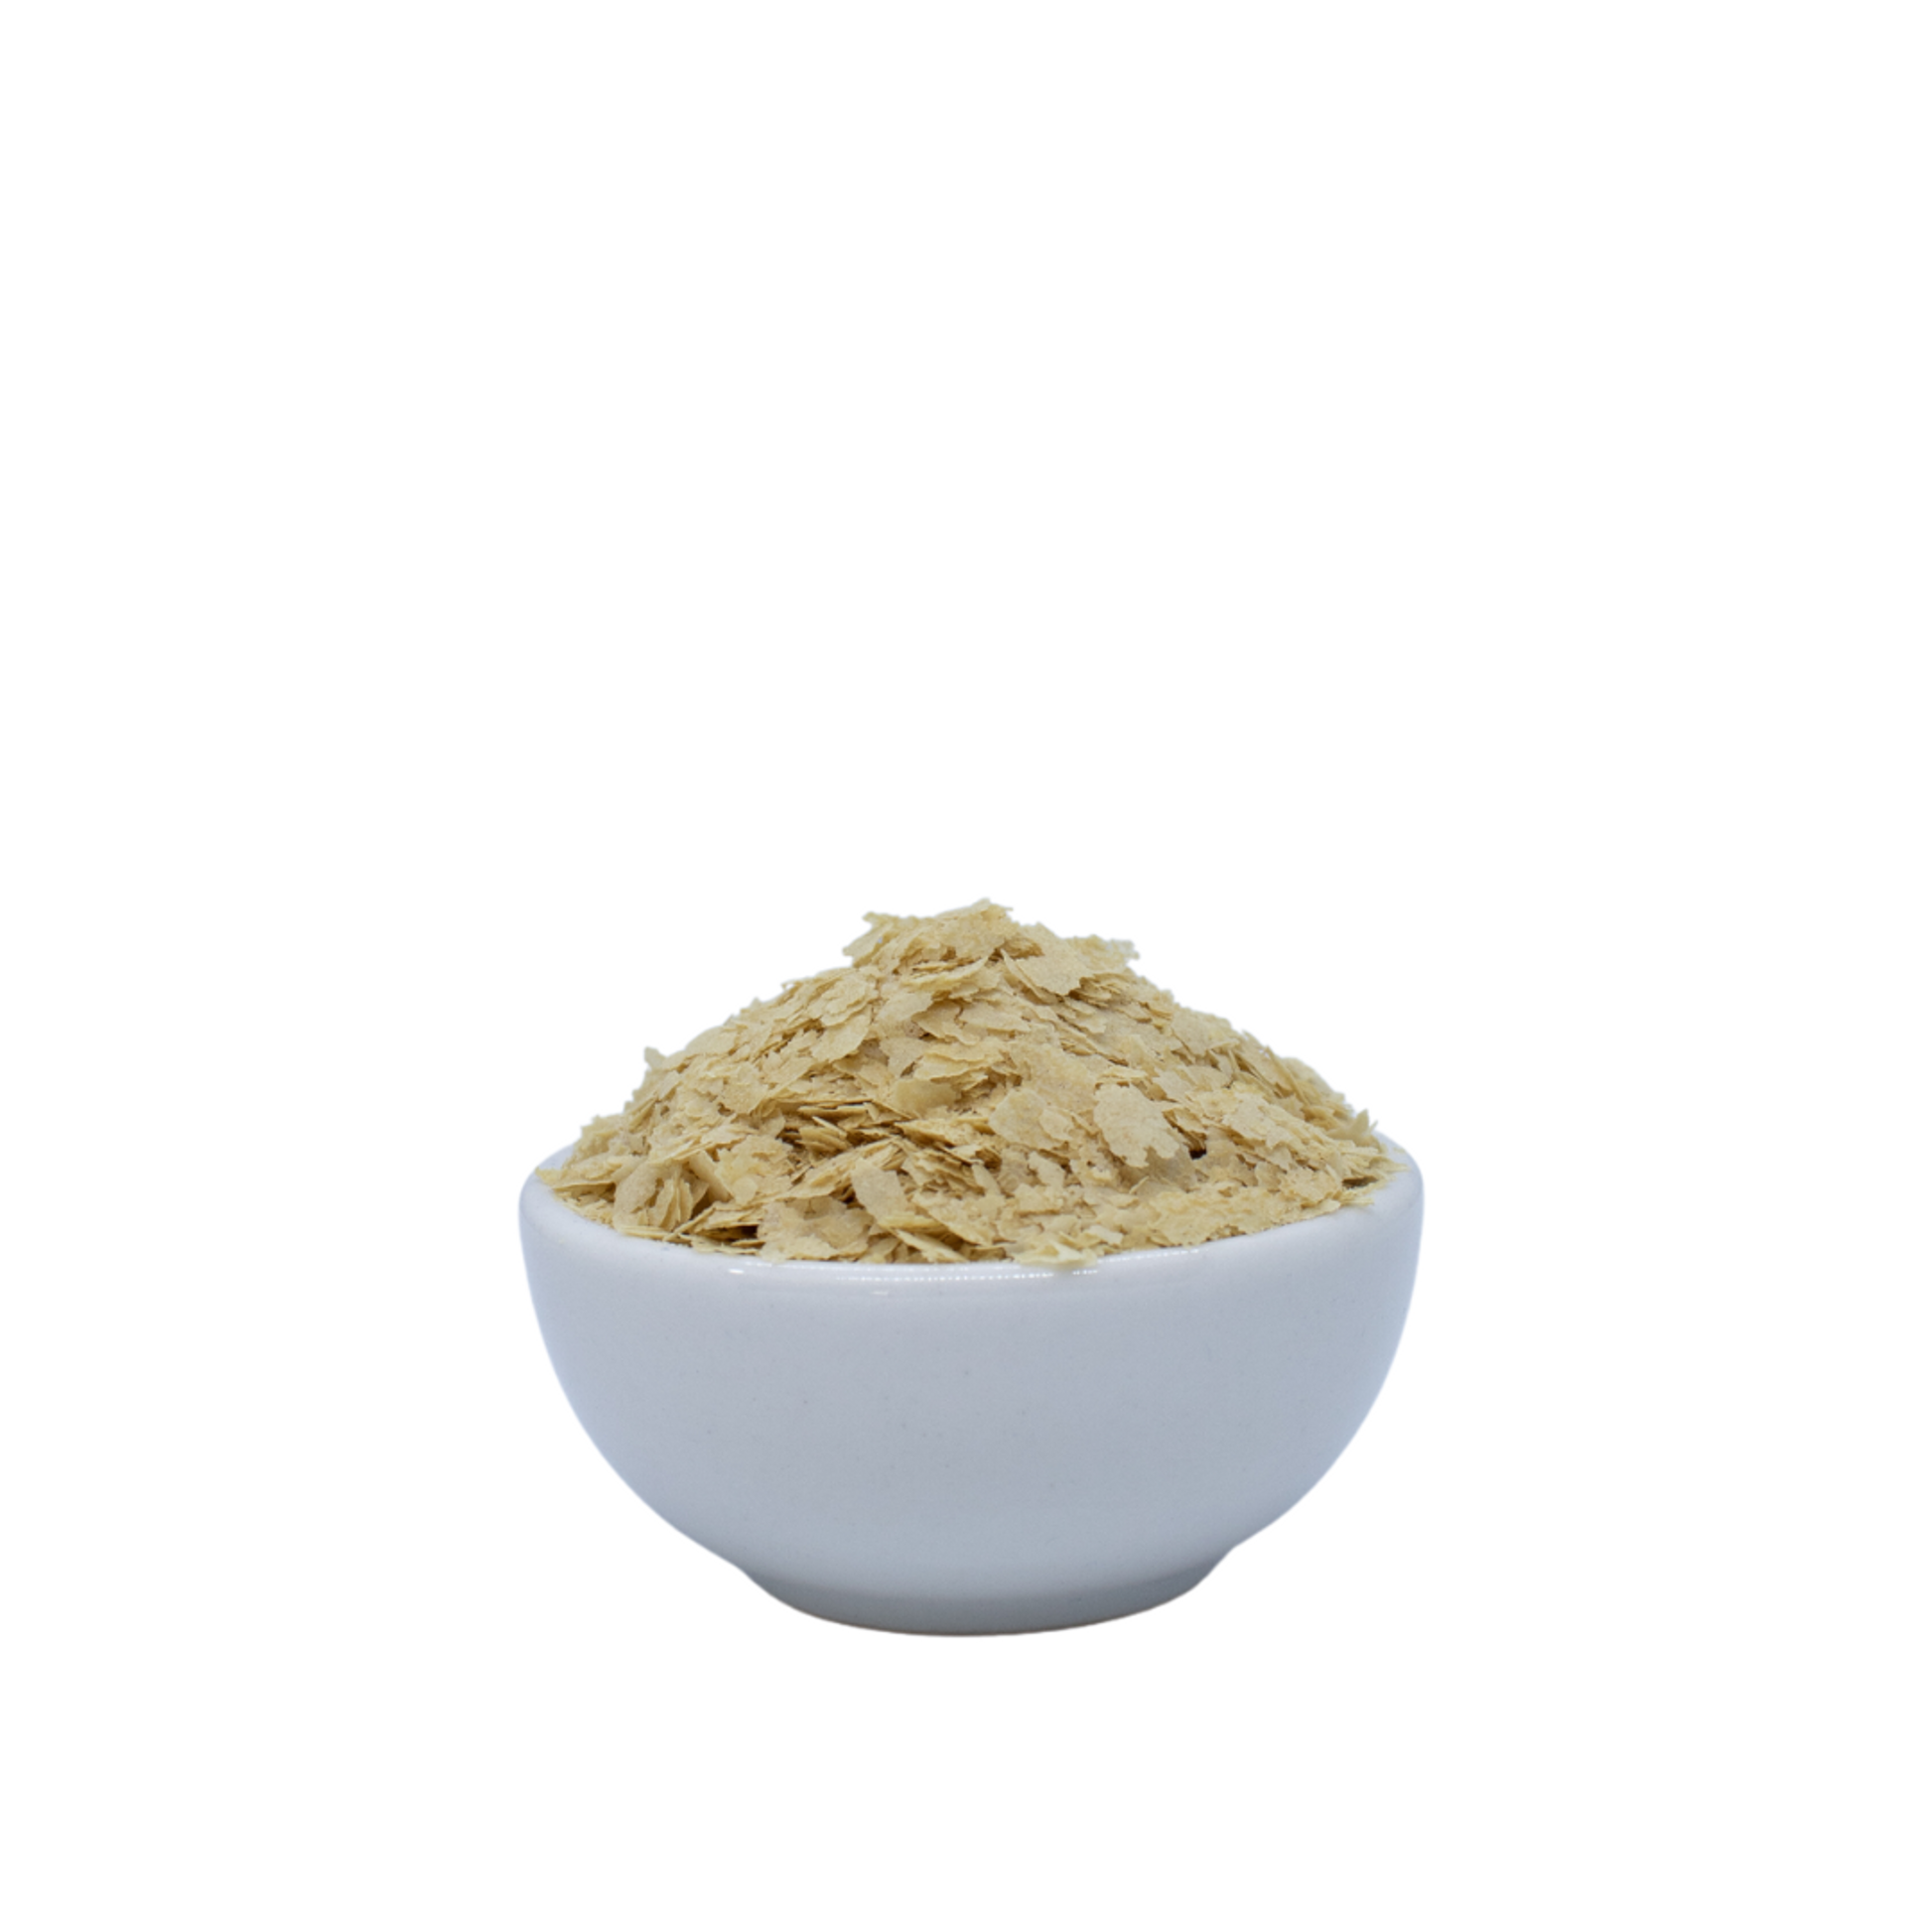 Nutritional Yeast Bland Flakes Sattvic Foods